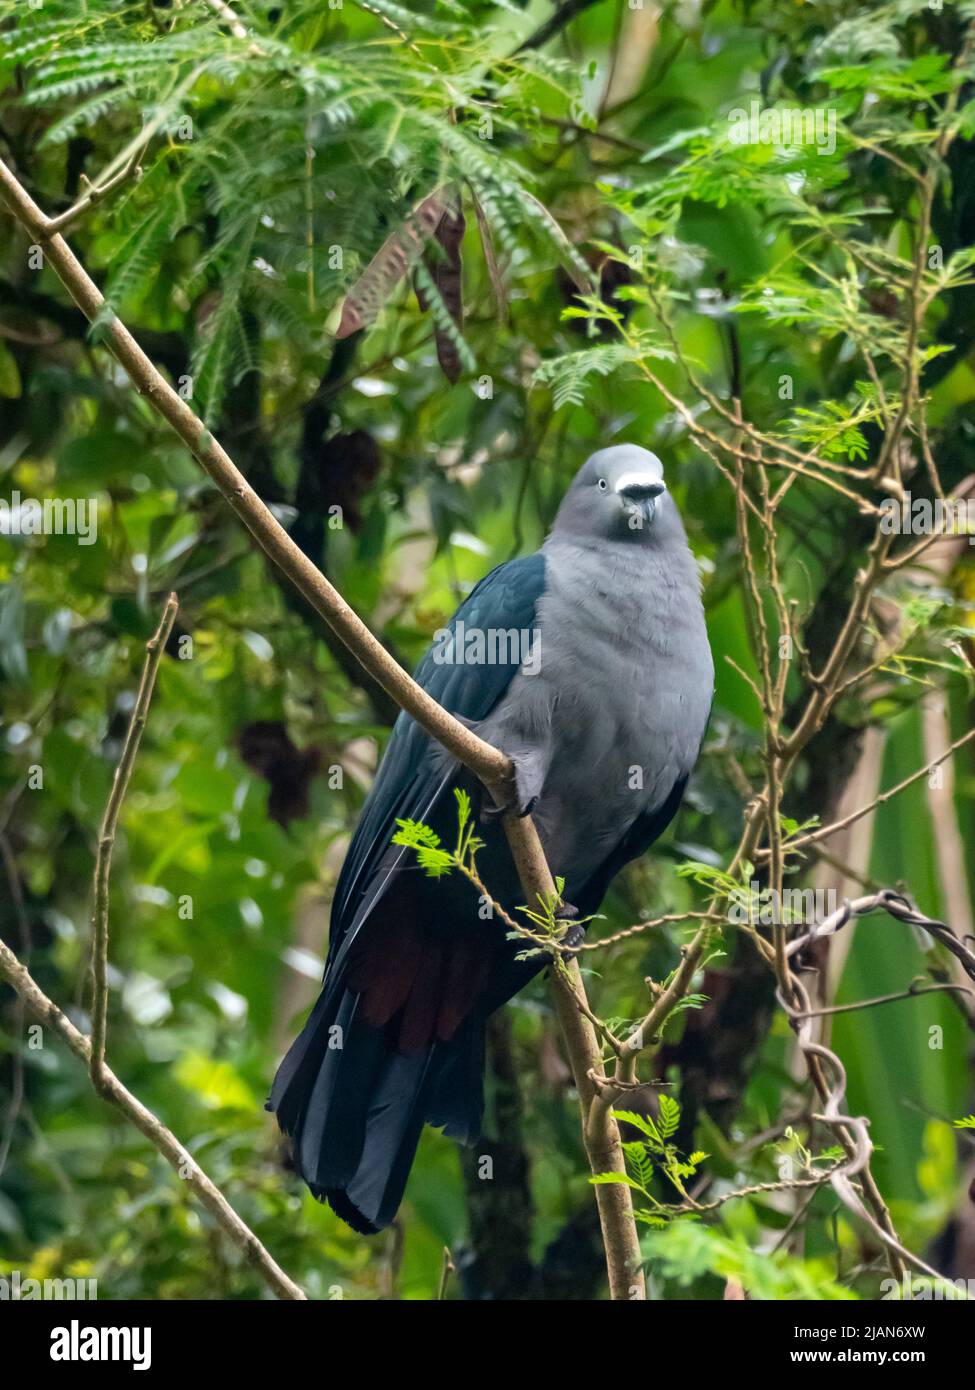 Marquesas Imperial-Pigeon, Ducula galeata, an endemic pigeon in the Marquesas islands of French Polynesia Stock Photo